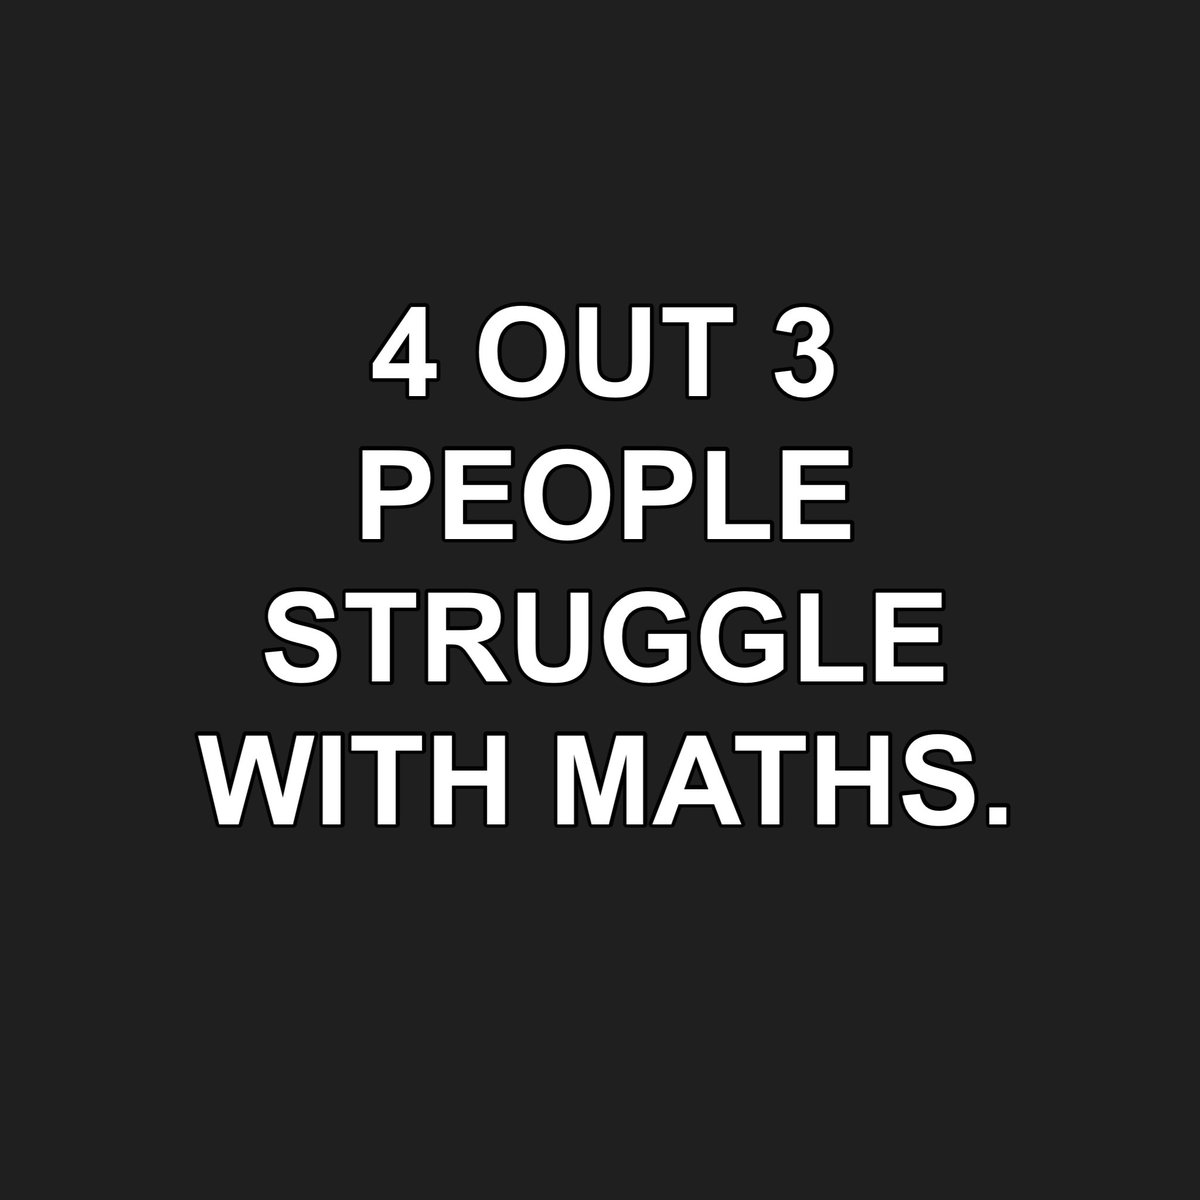 There are 3 kinds of people in the World: people that understand Maths & people that do not understand Maths. 🤣🤣🤣. I am the third kind😂😂. #lol #humour #humor #math #maths #mathematics #hopeless #funny #laughs #